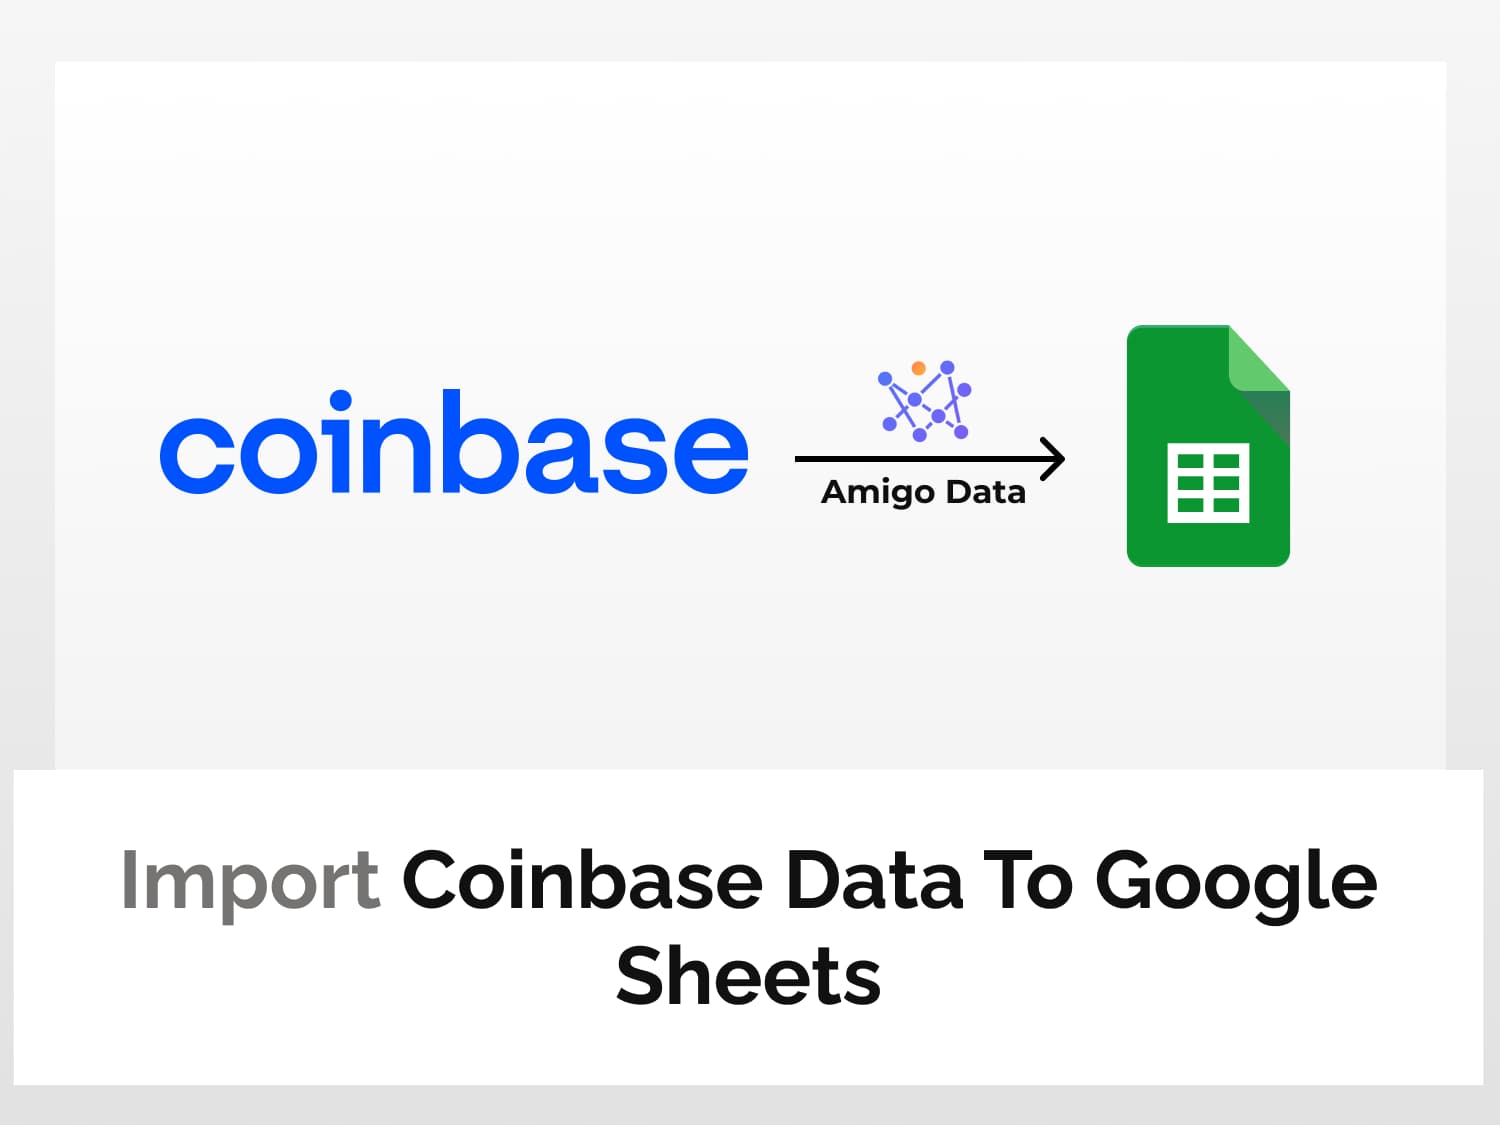 How to import Coinbase data to Google Sheets